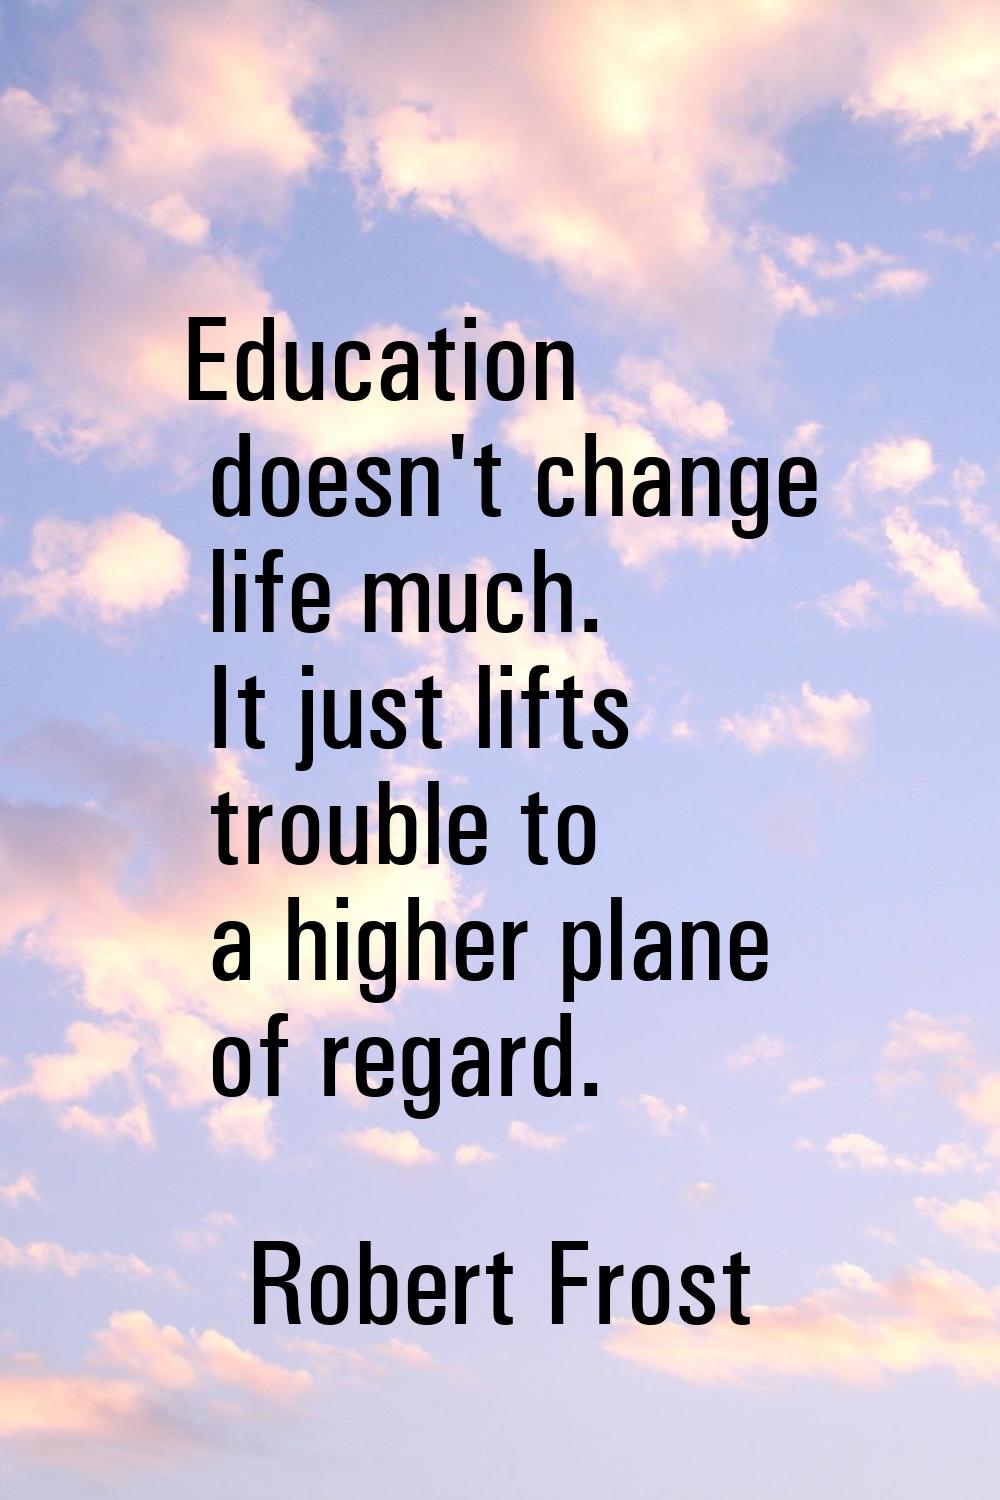 Education doesn't change life much. It just lifts trouble to a higher plane of regard.